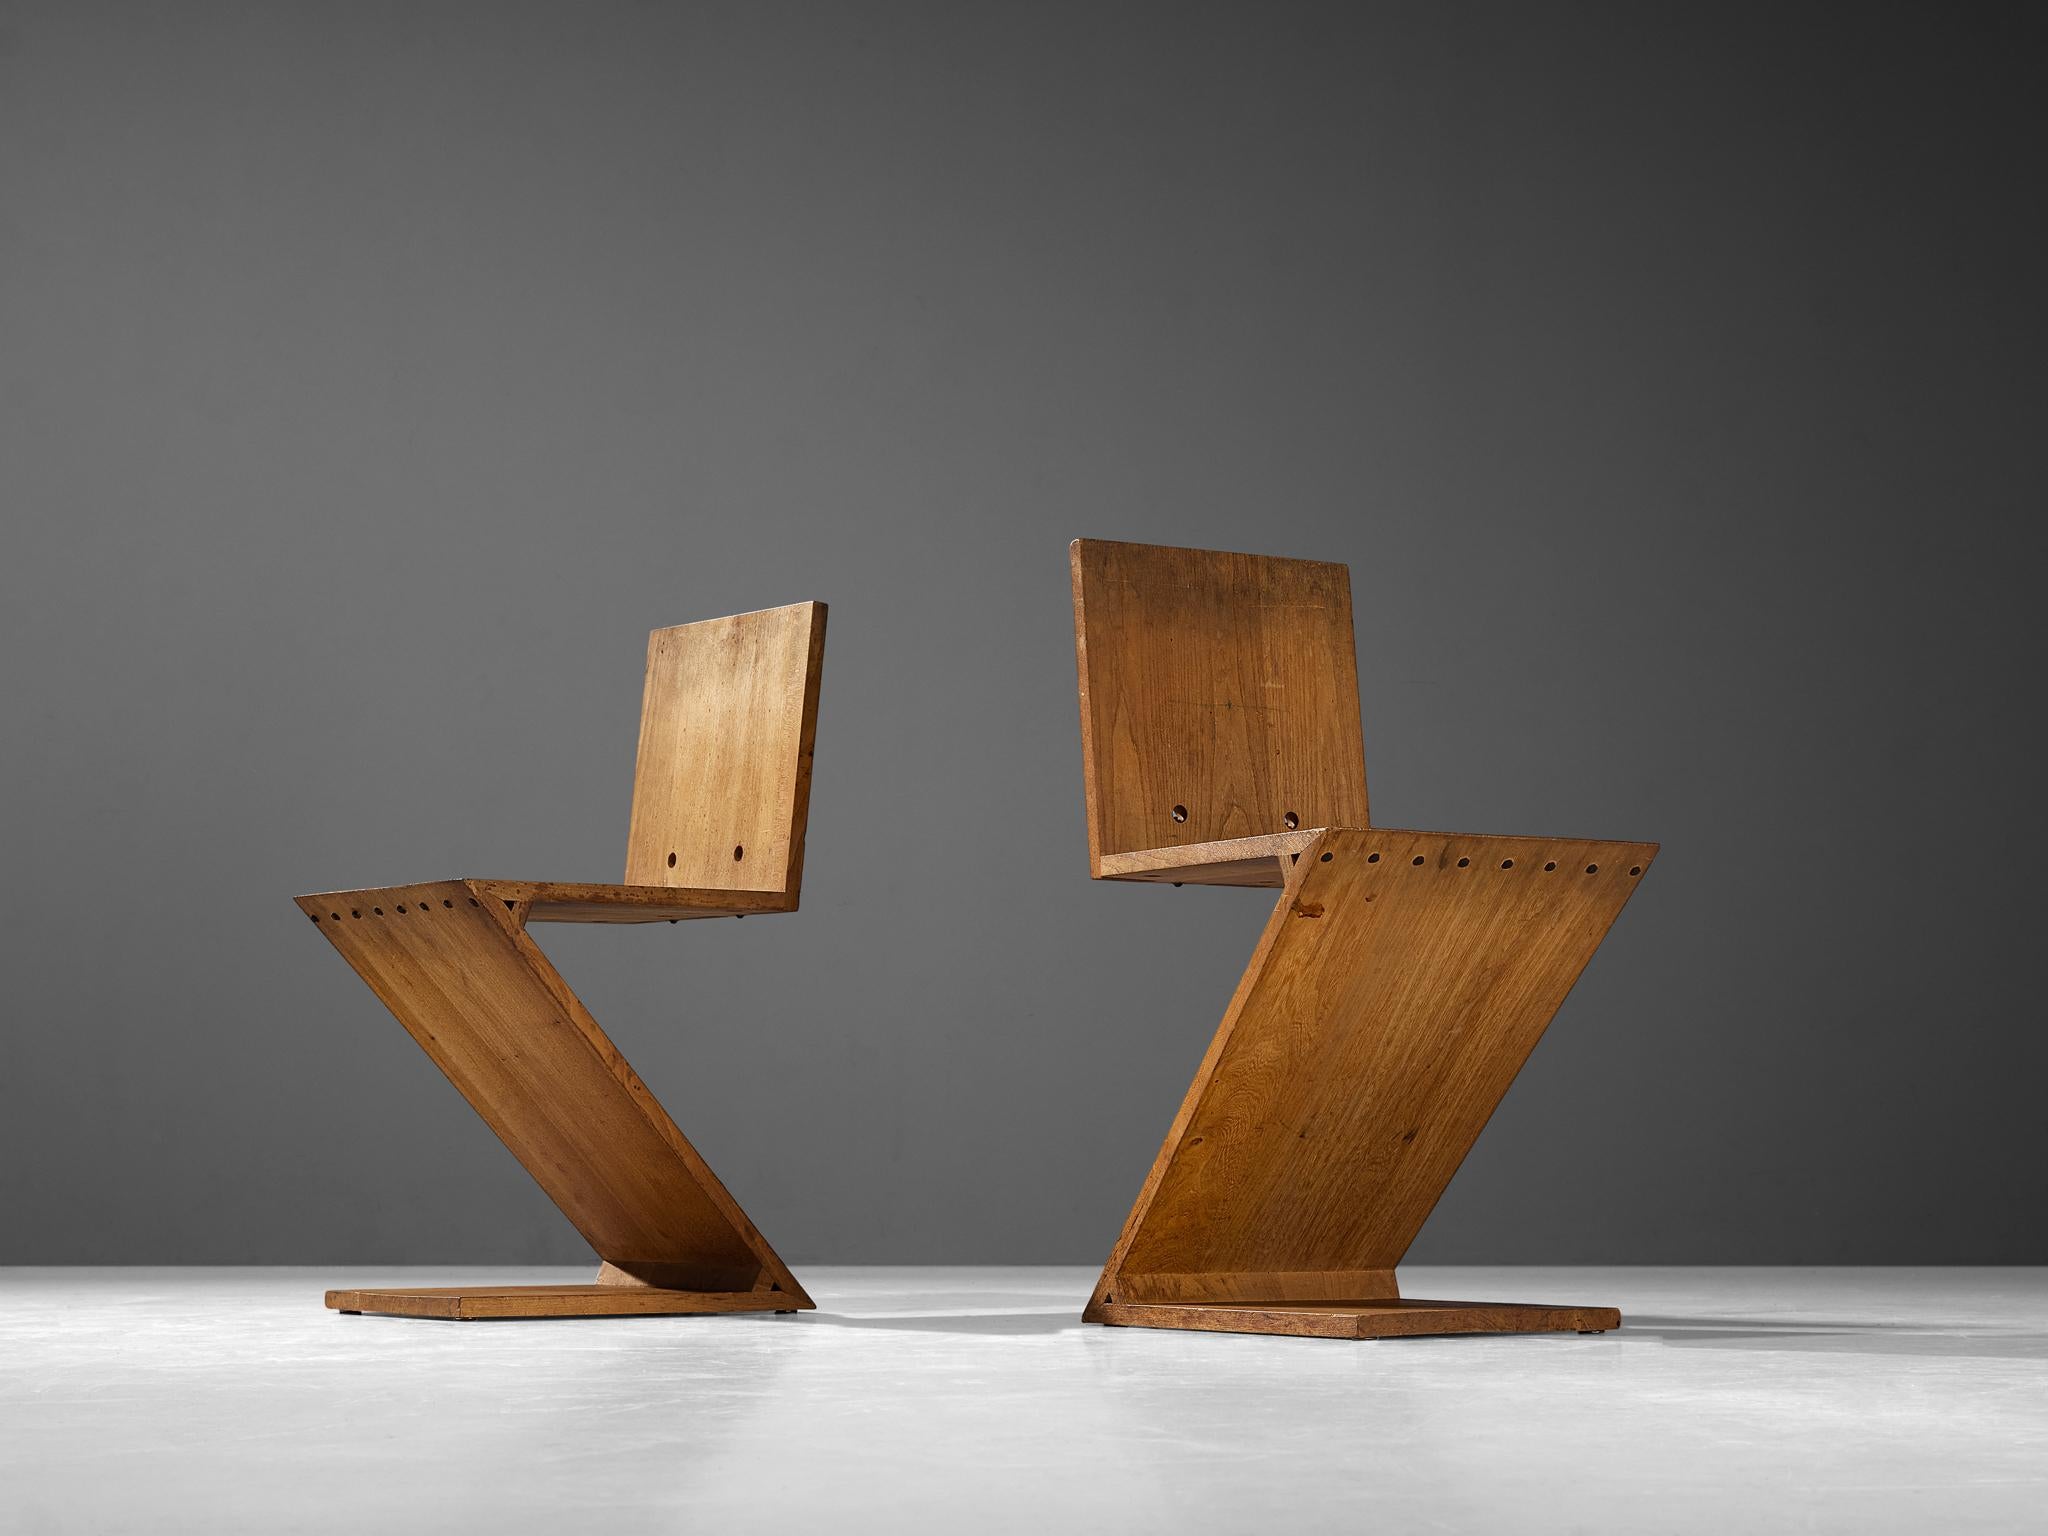 Gerrit Rietveld for Groenekan, ‘Zig Zag’ chair, elm, The Netherlands, design 1932/1933, manufactured between 1935-1973

Not a lot of chairs reach such fame like the ‘Zig Zag’ which is most likely one of the greatest icons ever designed by Gerrit